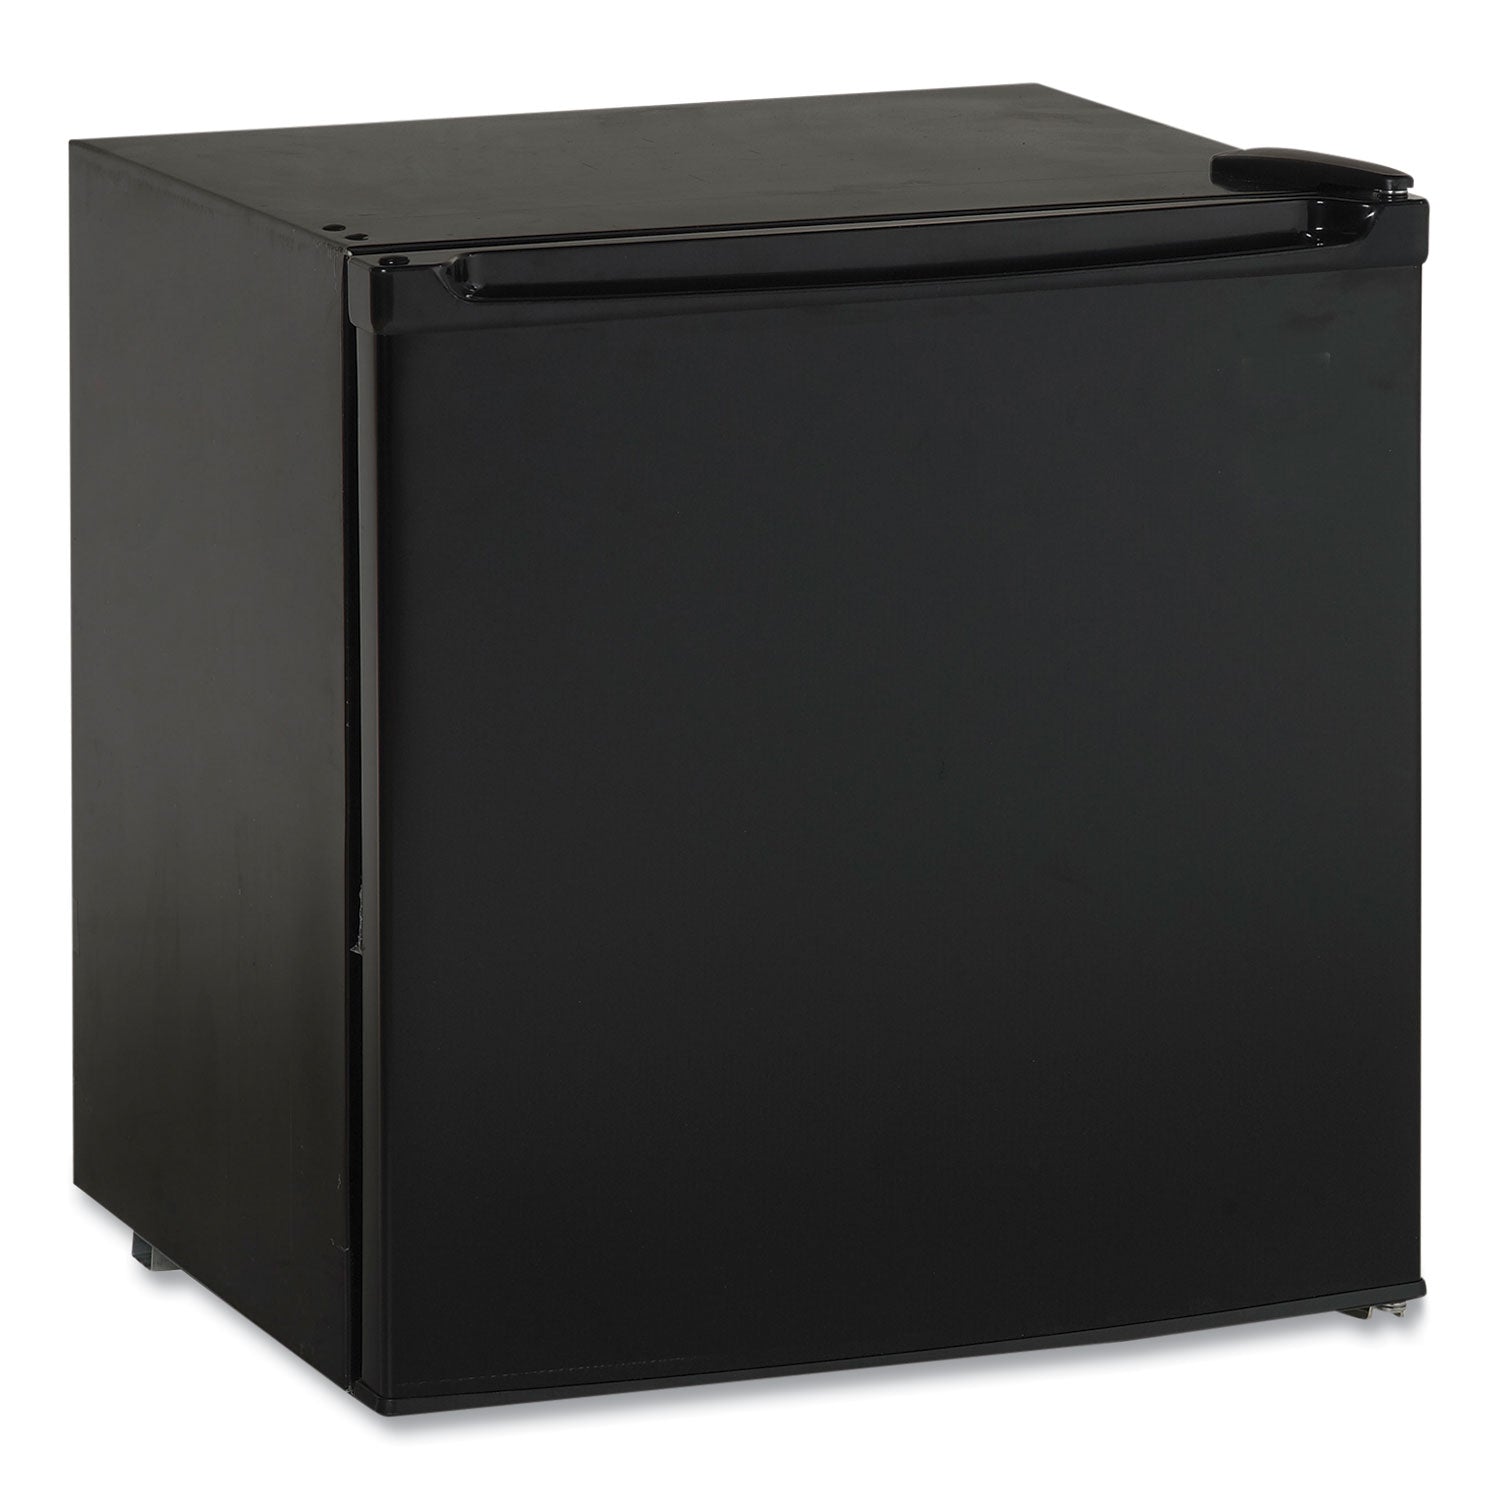 17-cubic-ft-compact-refrigerator-with-chiller-compartment-black_avarm16j1b17x1b - 1